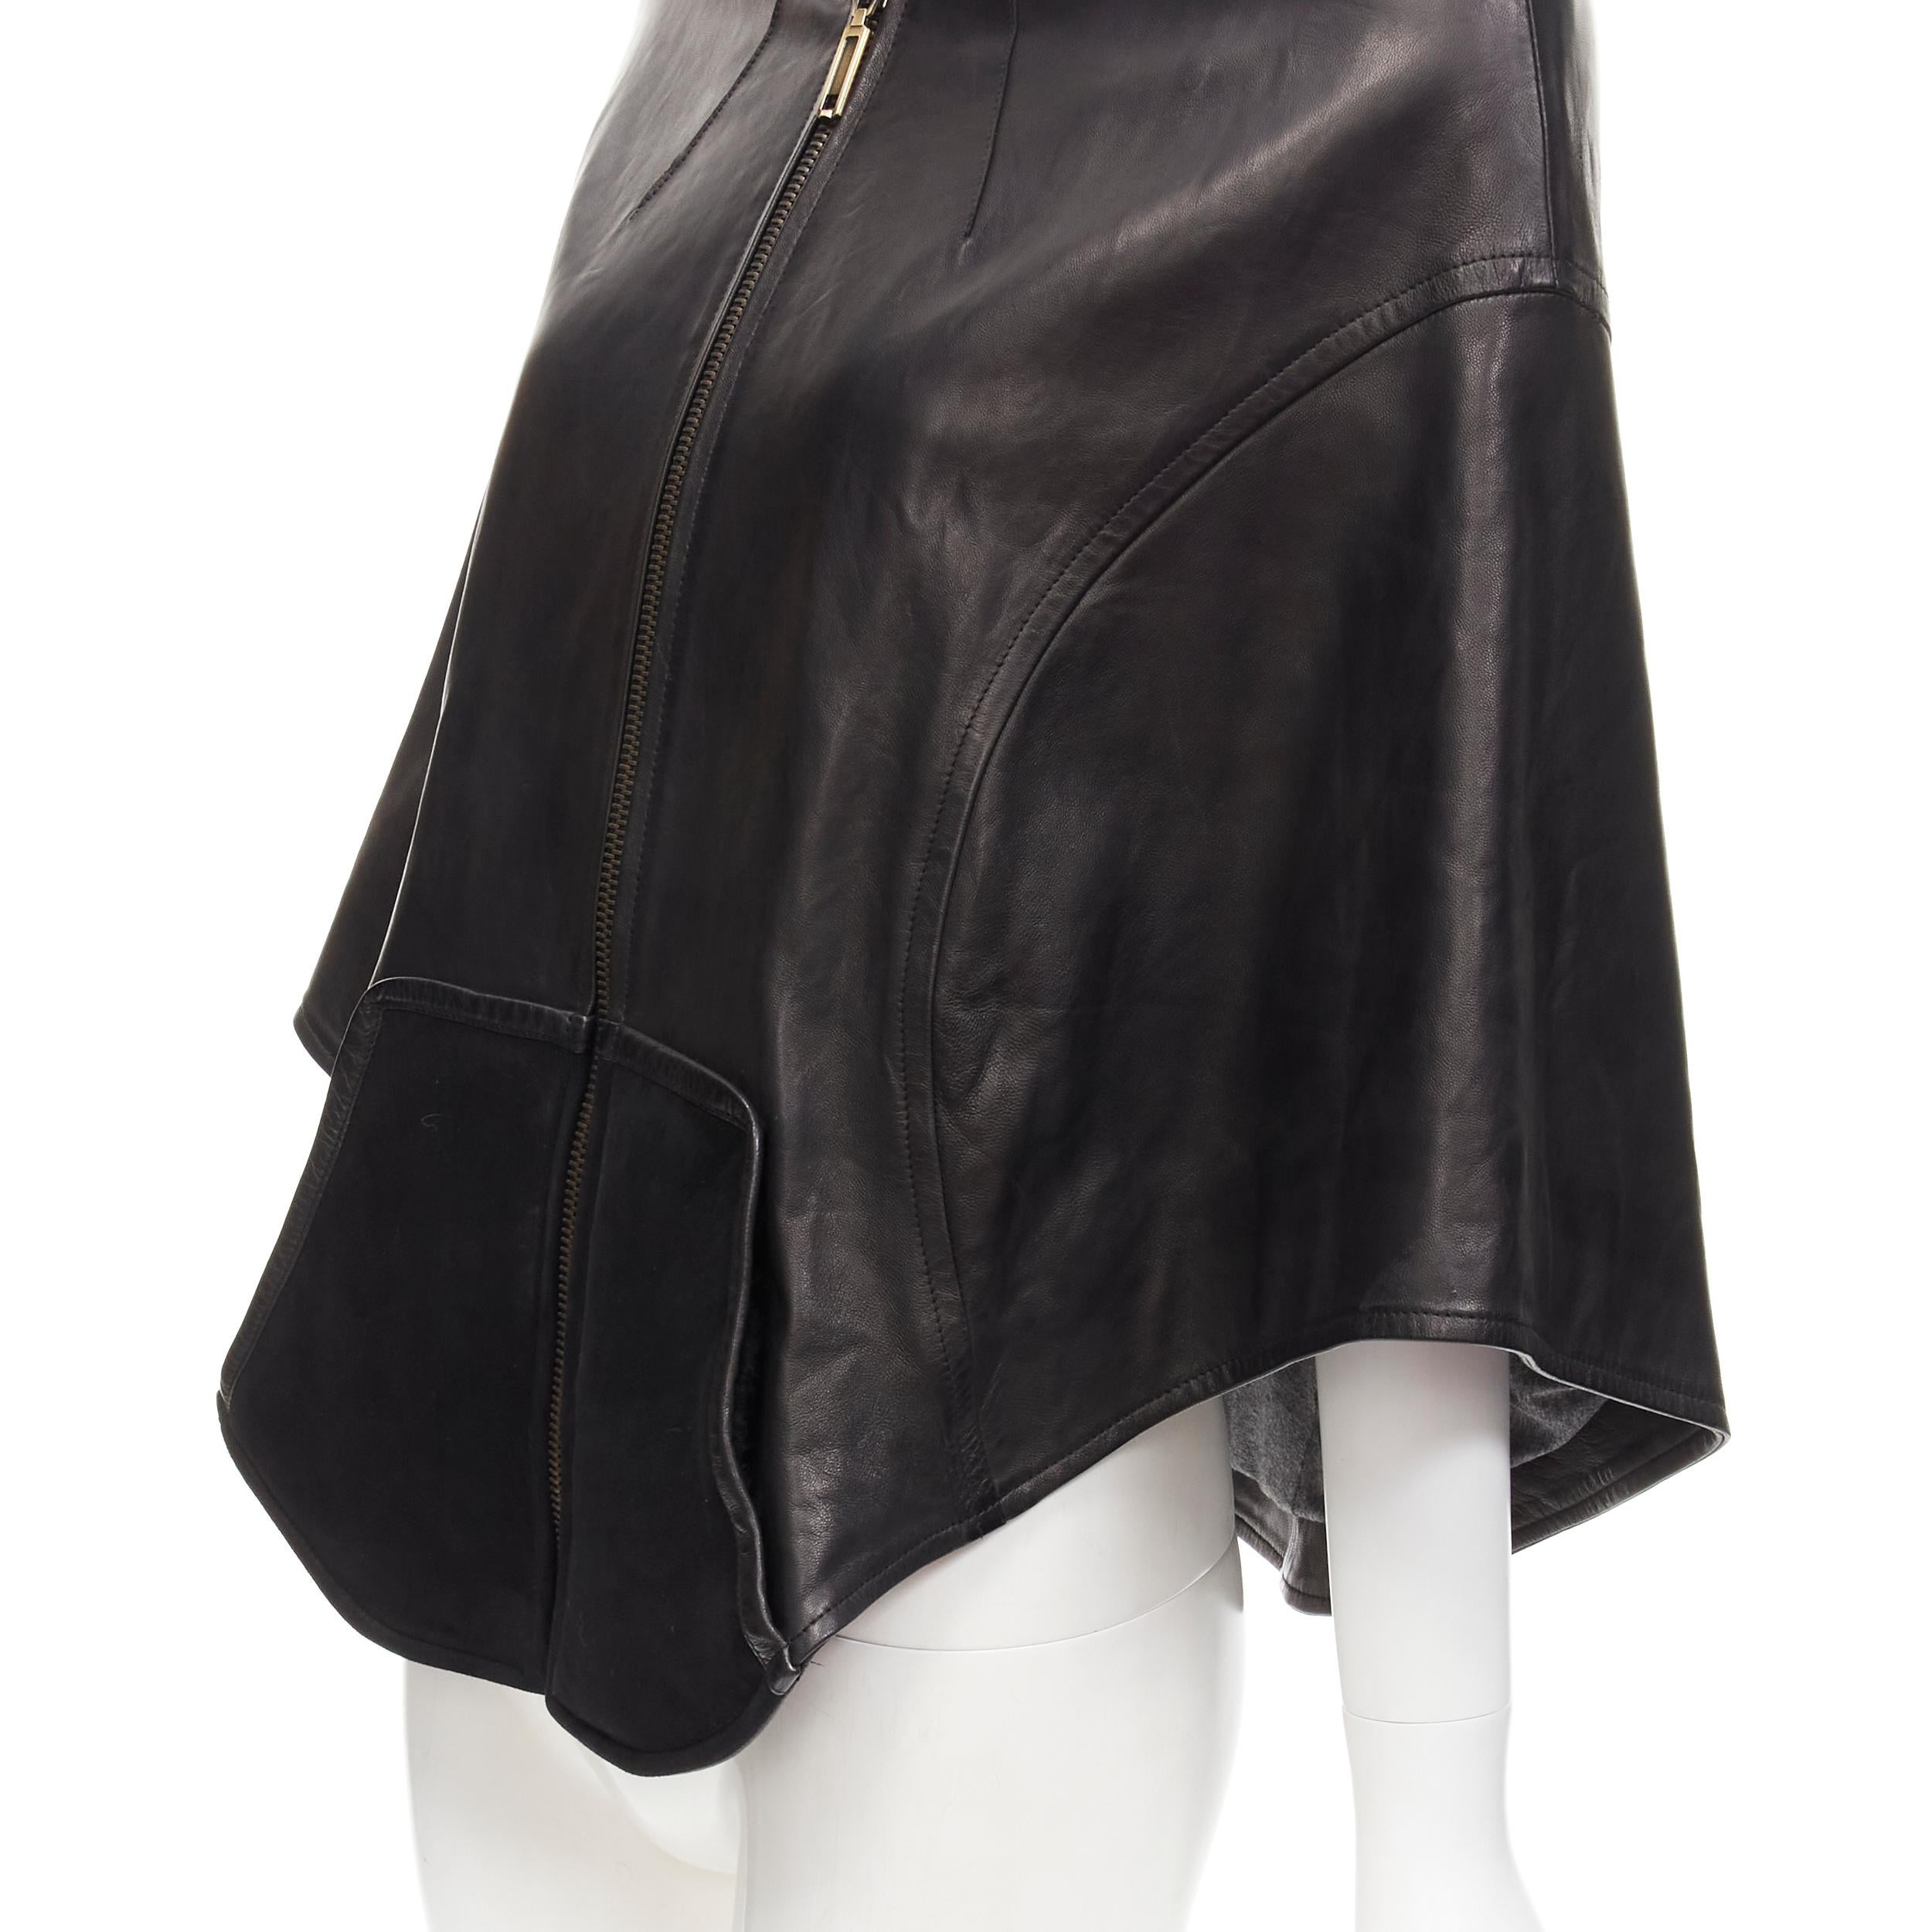 INES ET MARECHAL black lambskin leather shearling hood circle cape IT38 XS
Brand: Ines et Marechal
Material: Leather
Color: Black
Pattern: Solid
Closure: Zip
Extra Detail: Black genuine lambskin leather. Suede and shearling lined hood. Zip front